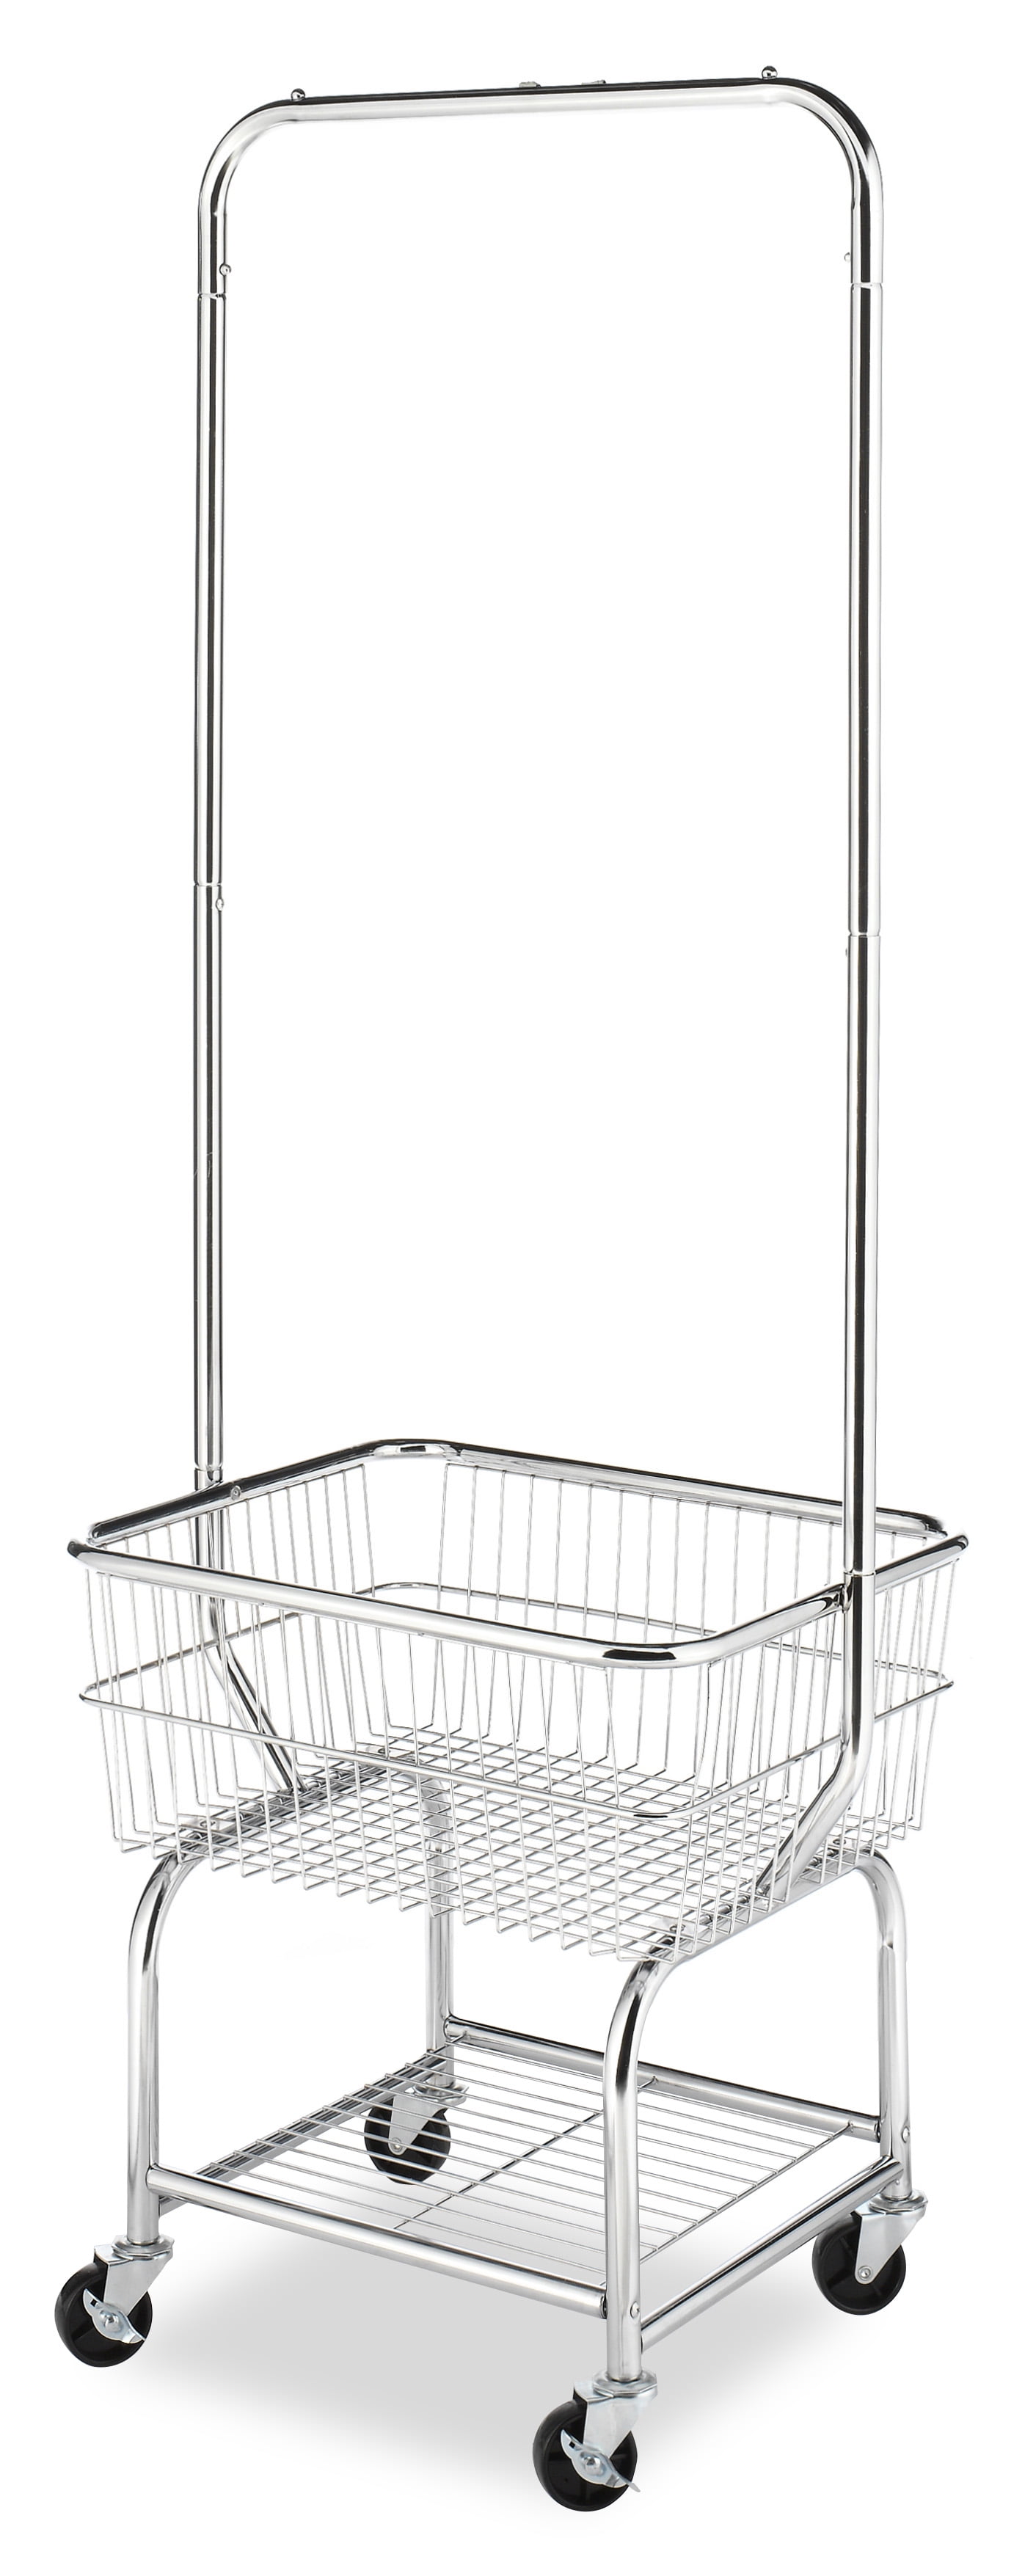 rolling laundry basket with hanging bar